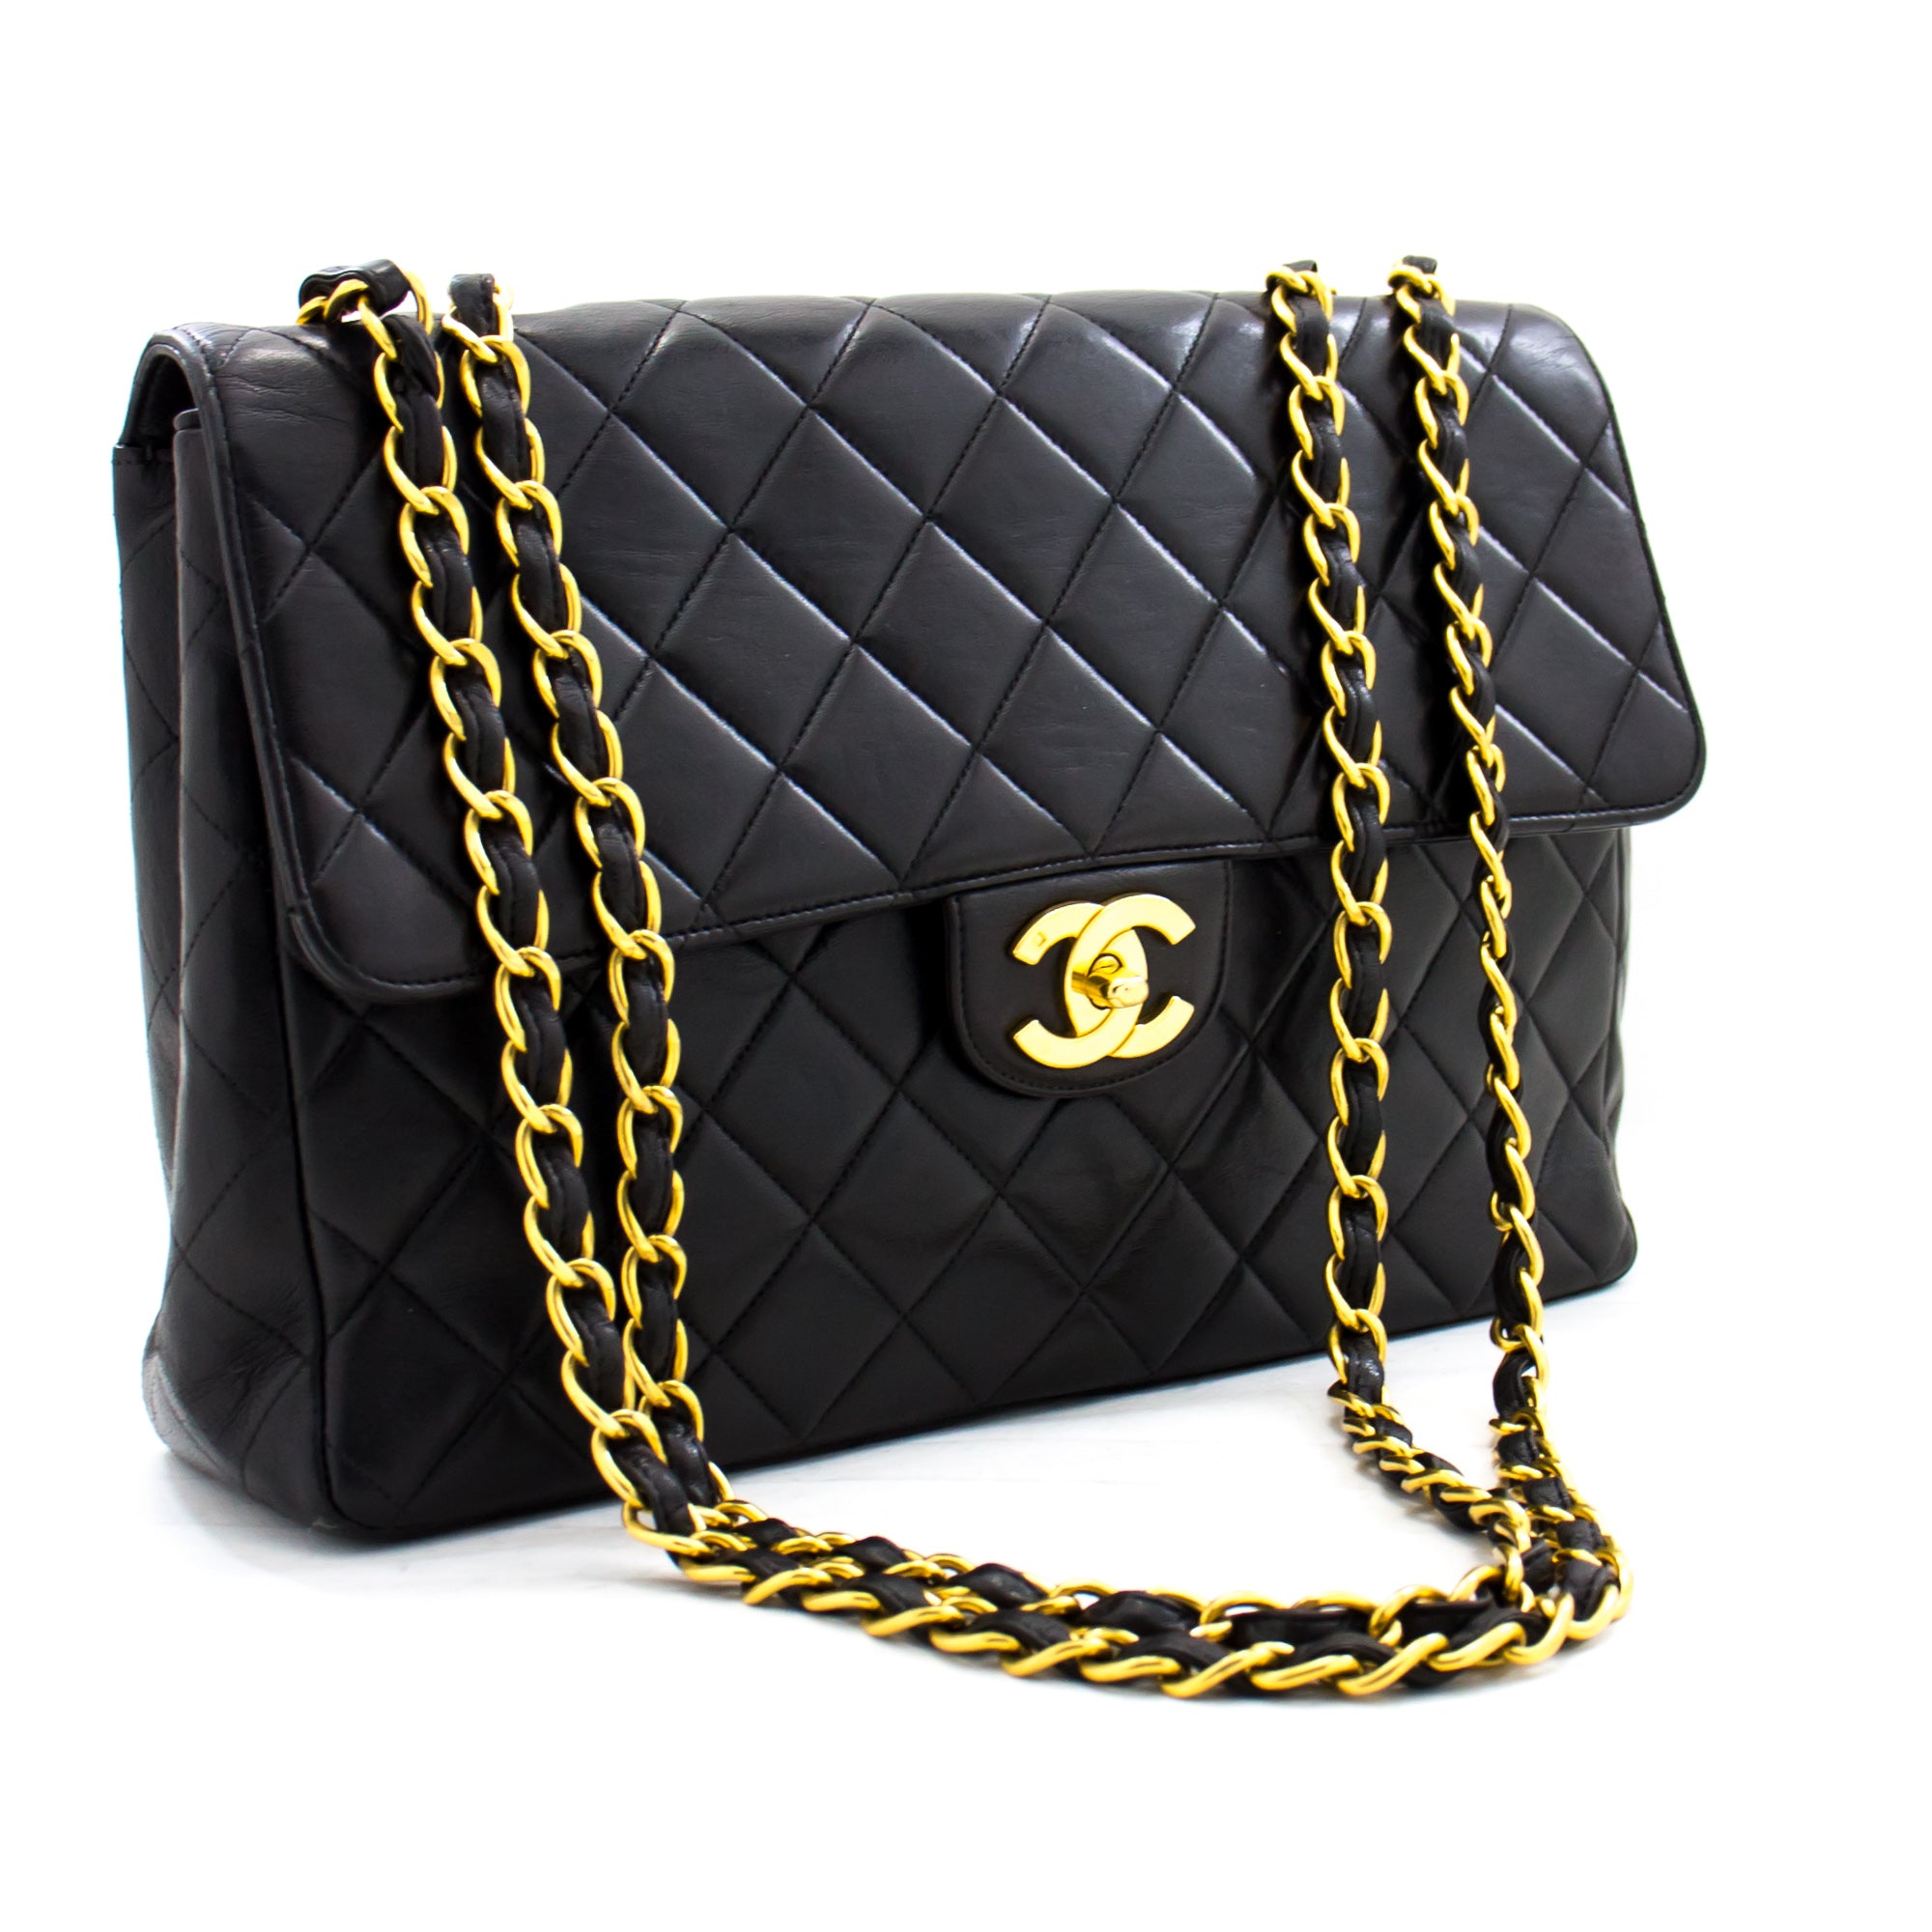 Authentic CHANEL Double Flap Black Quilted Leather Gold Chain Shoulder Bag